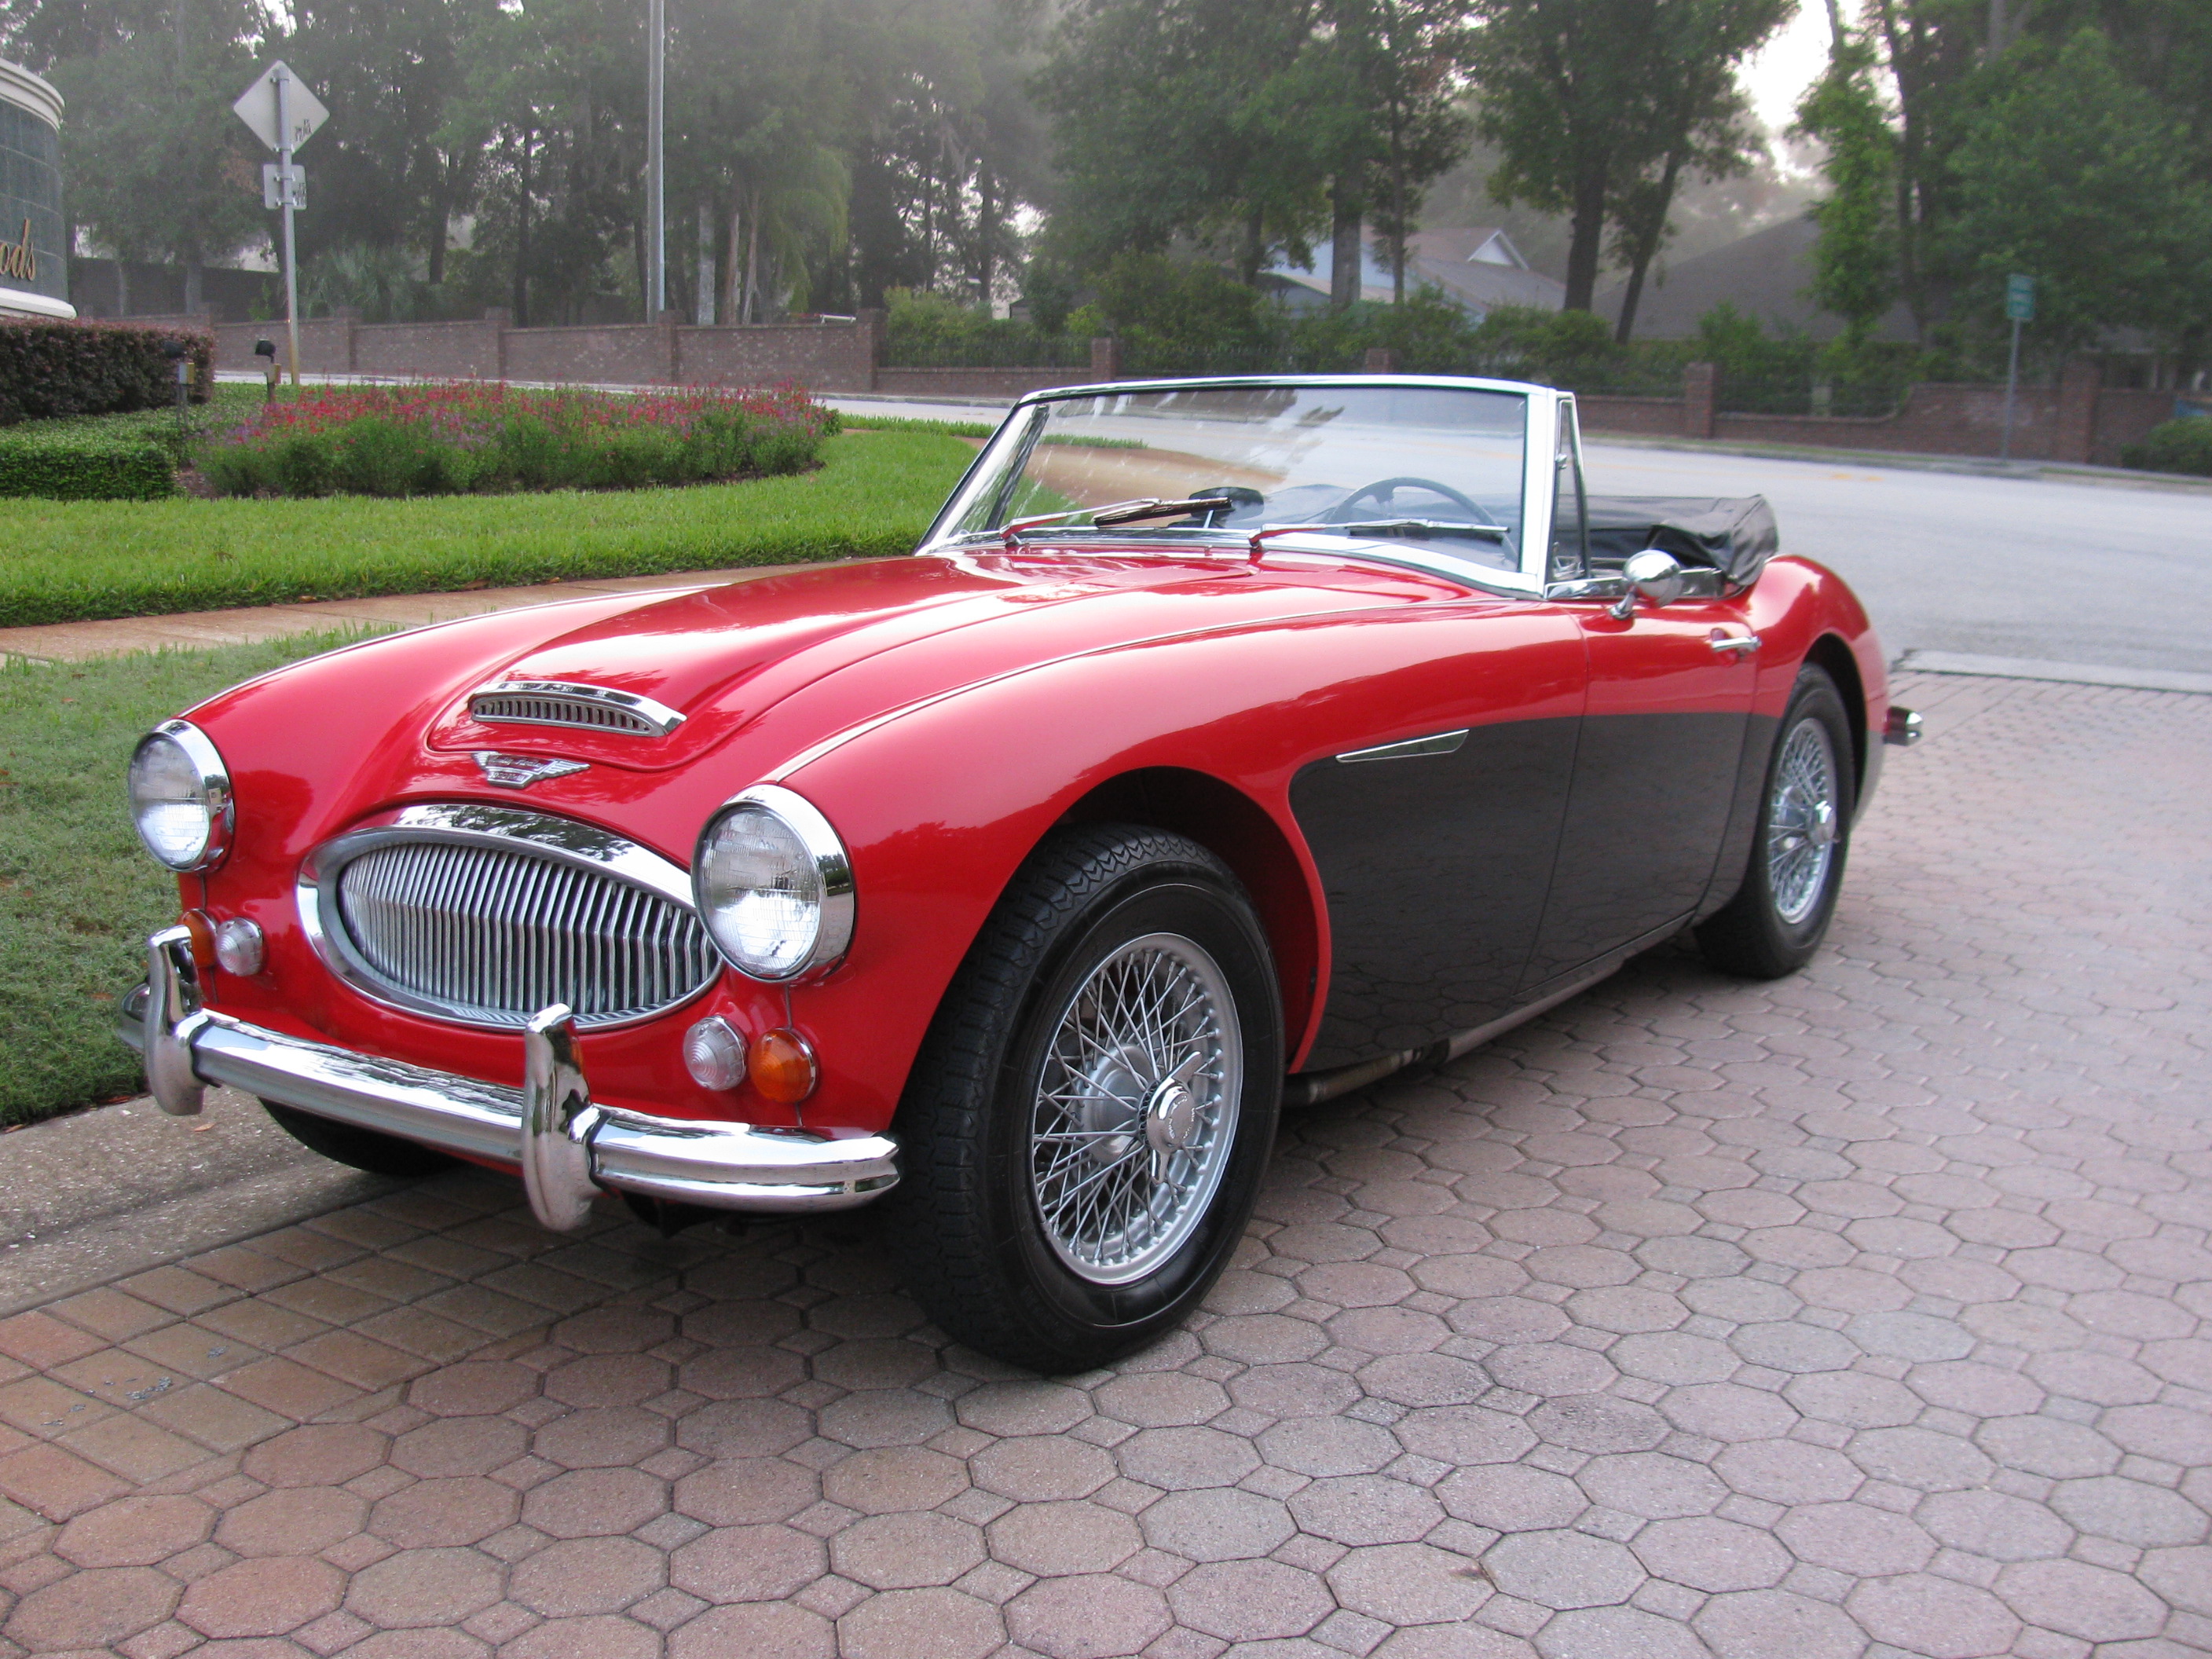 HQ Austin Healey 3000 Wallpapers | File 1800.91Kb